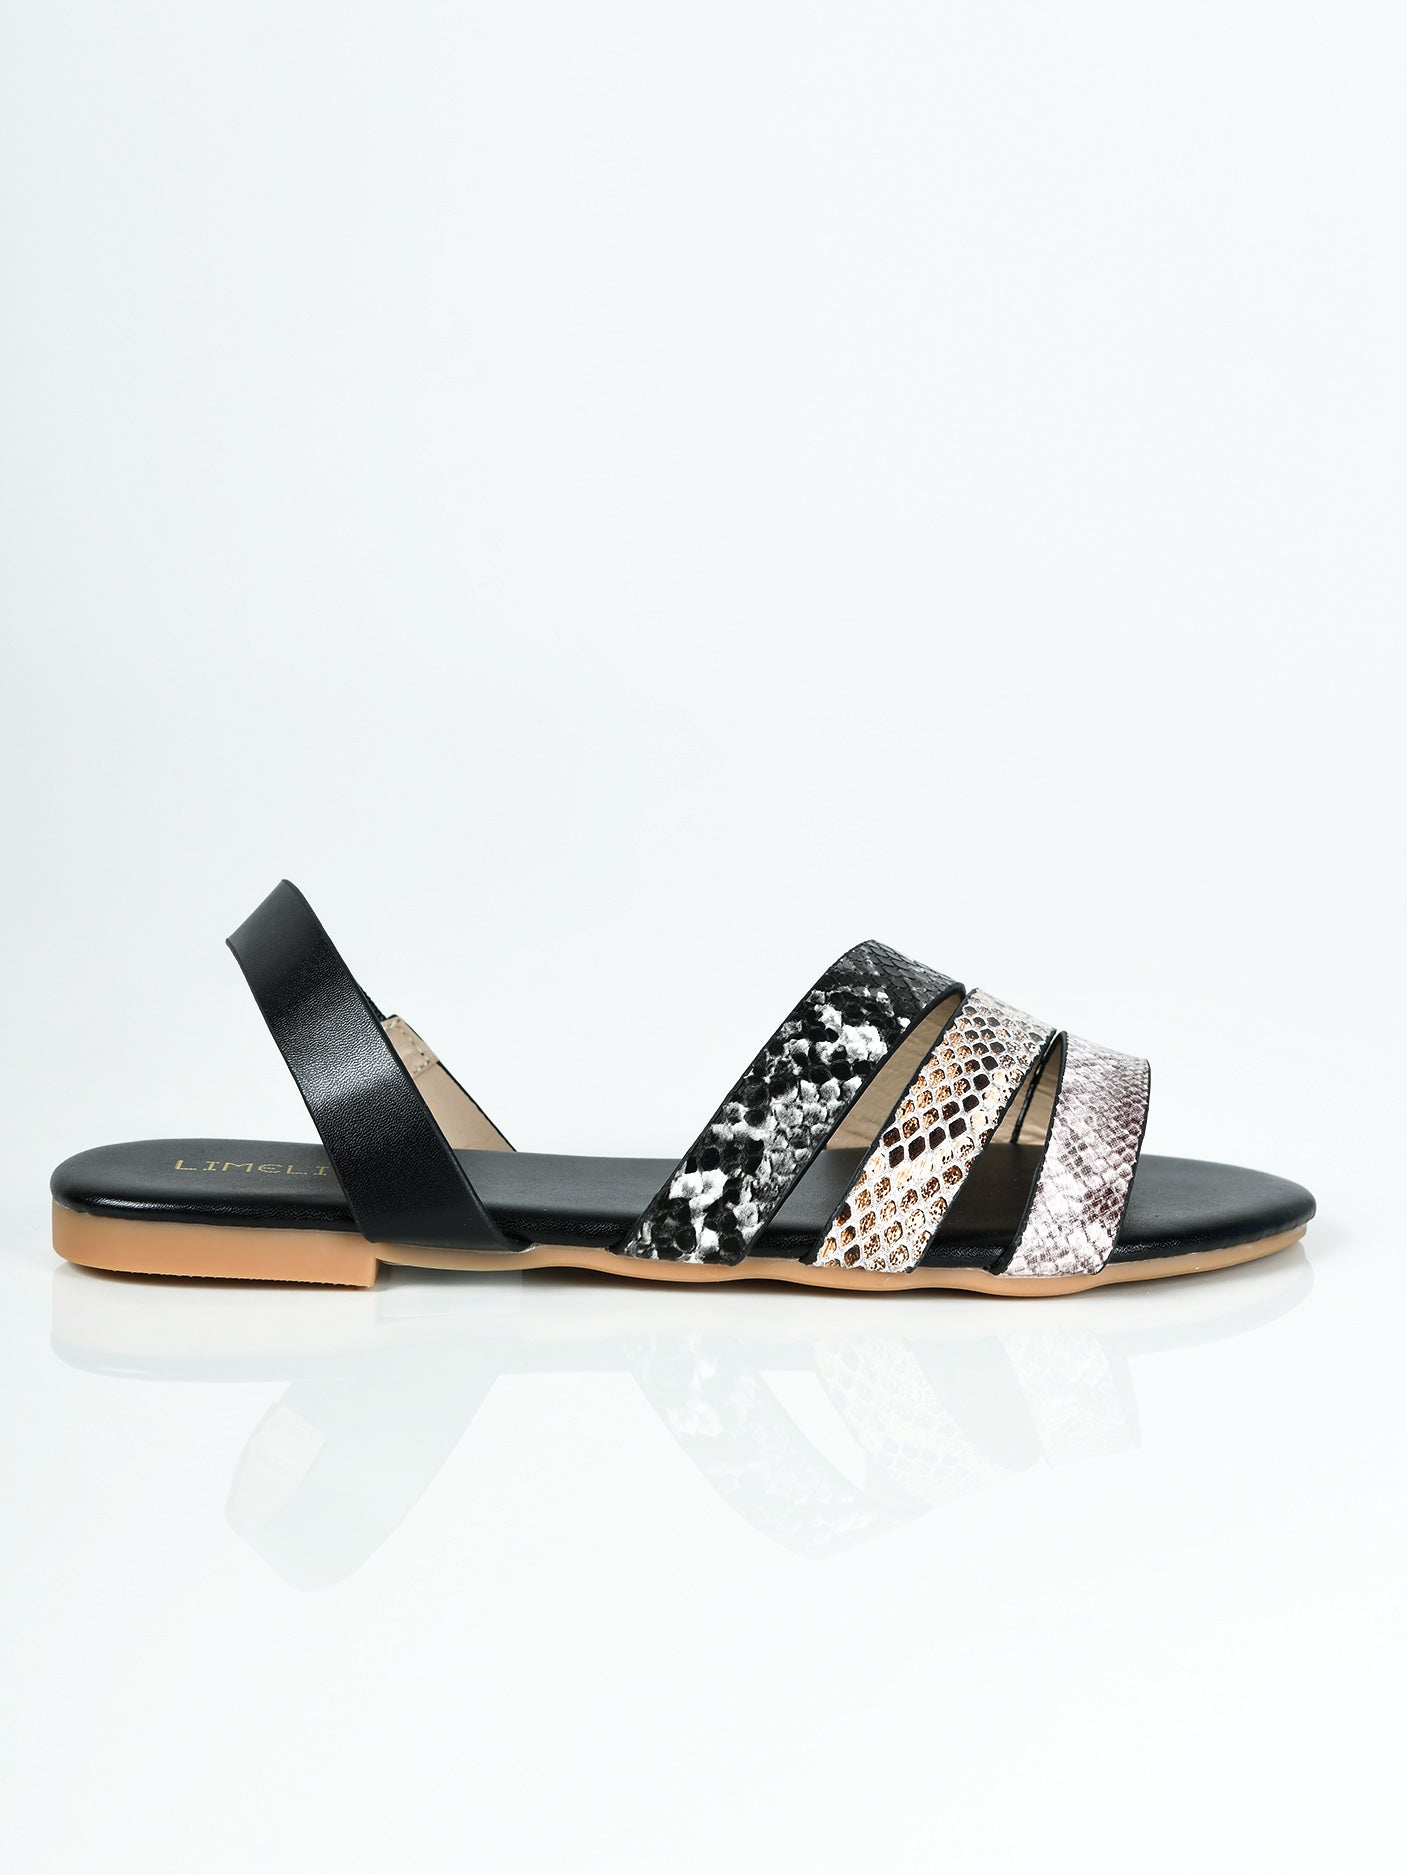 Textured Sandals - Black and White